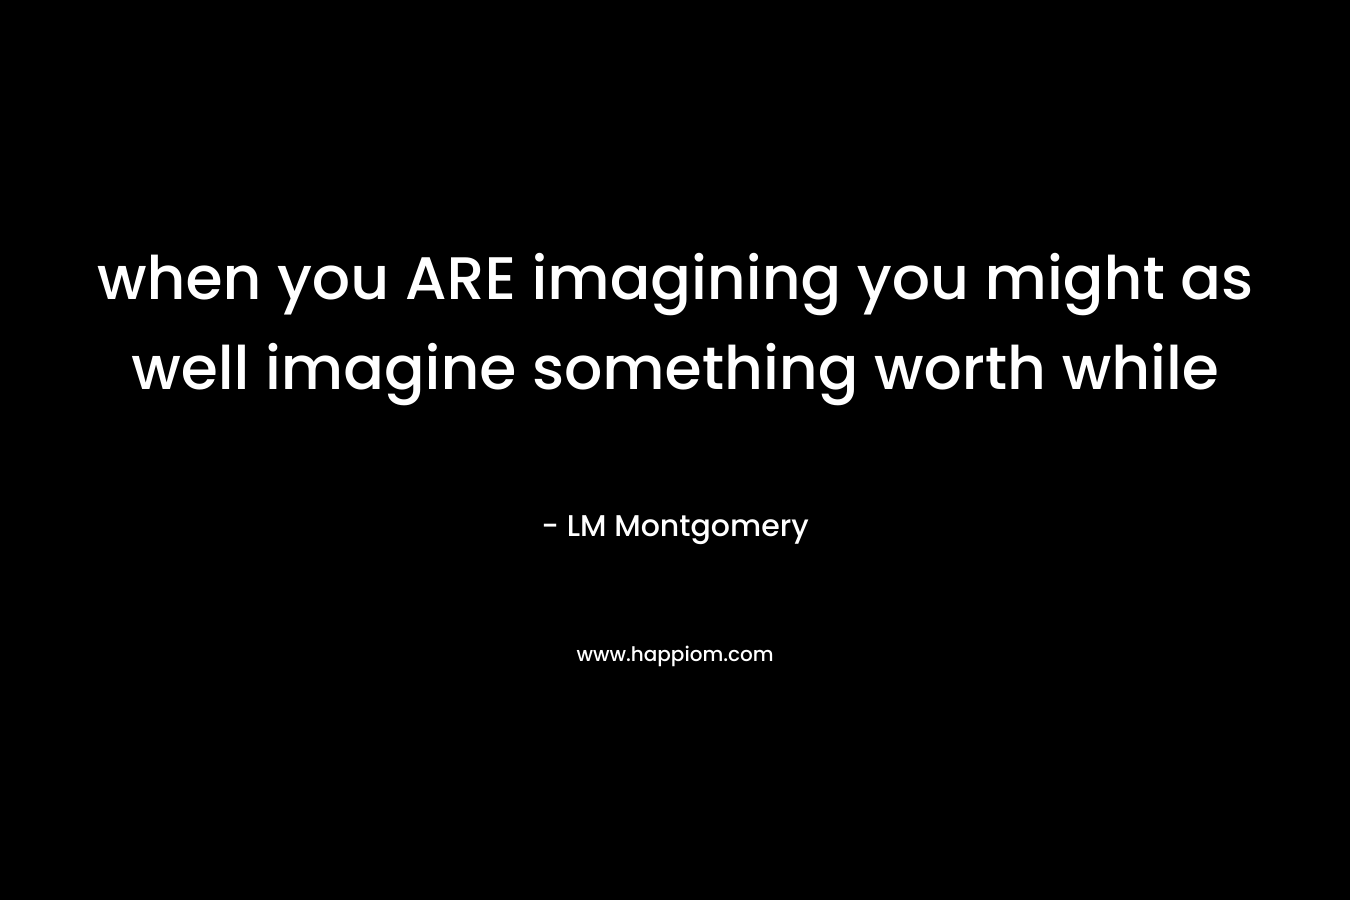 when you ARE imagining you might as well imagine something worth while